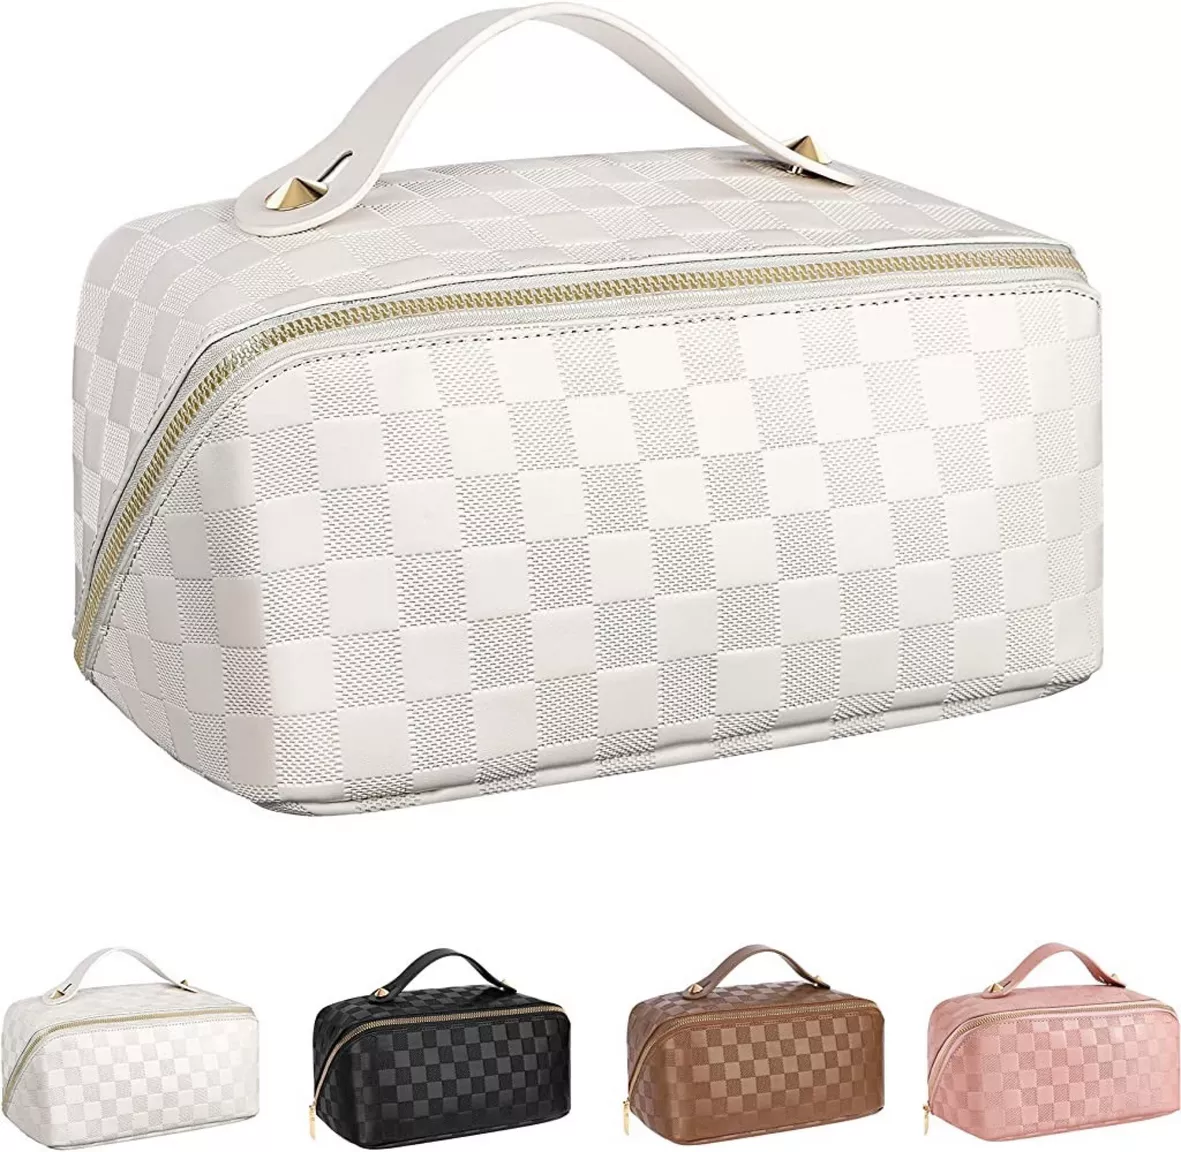 Preppy Pink White Checkered Large Makeup Bag Leather Travel Cosmetic  Organize